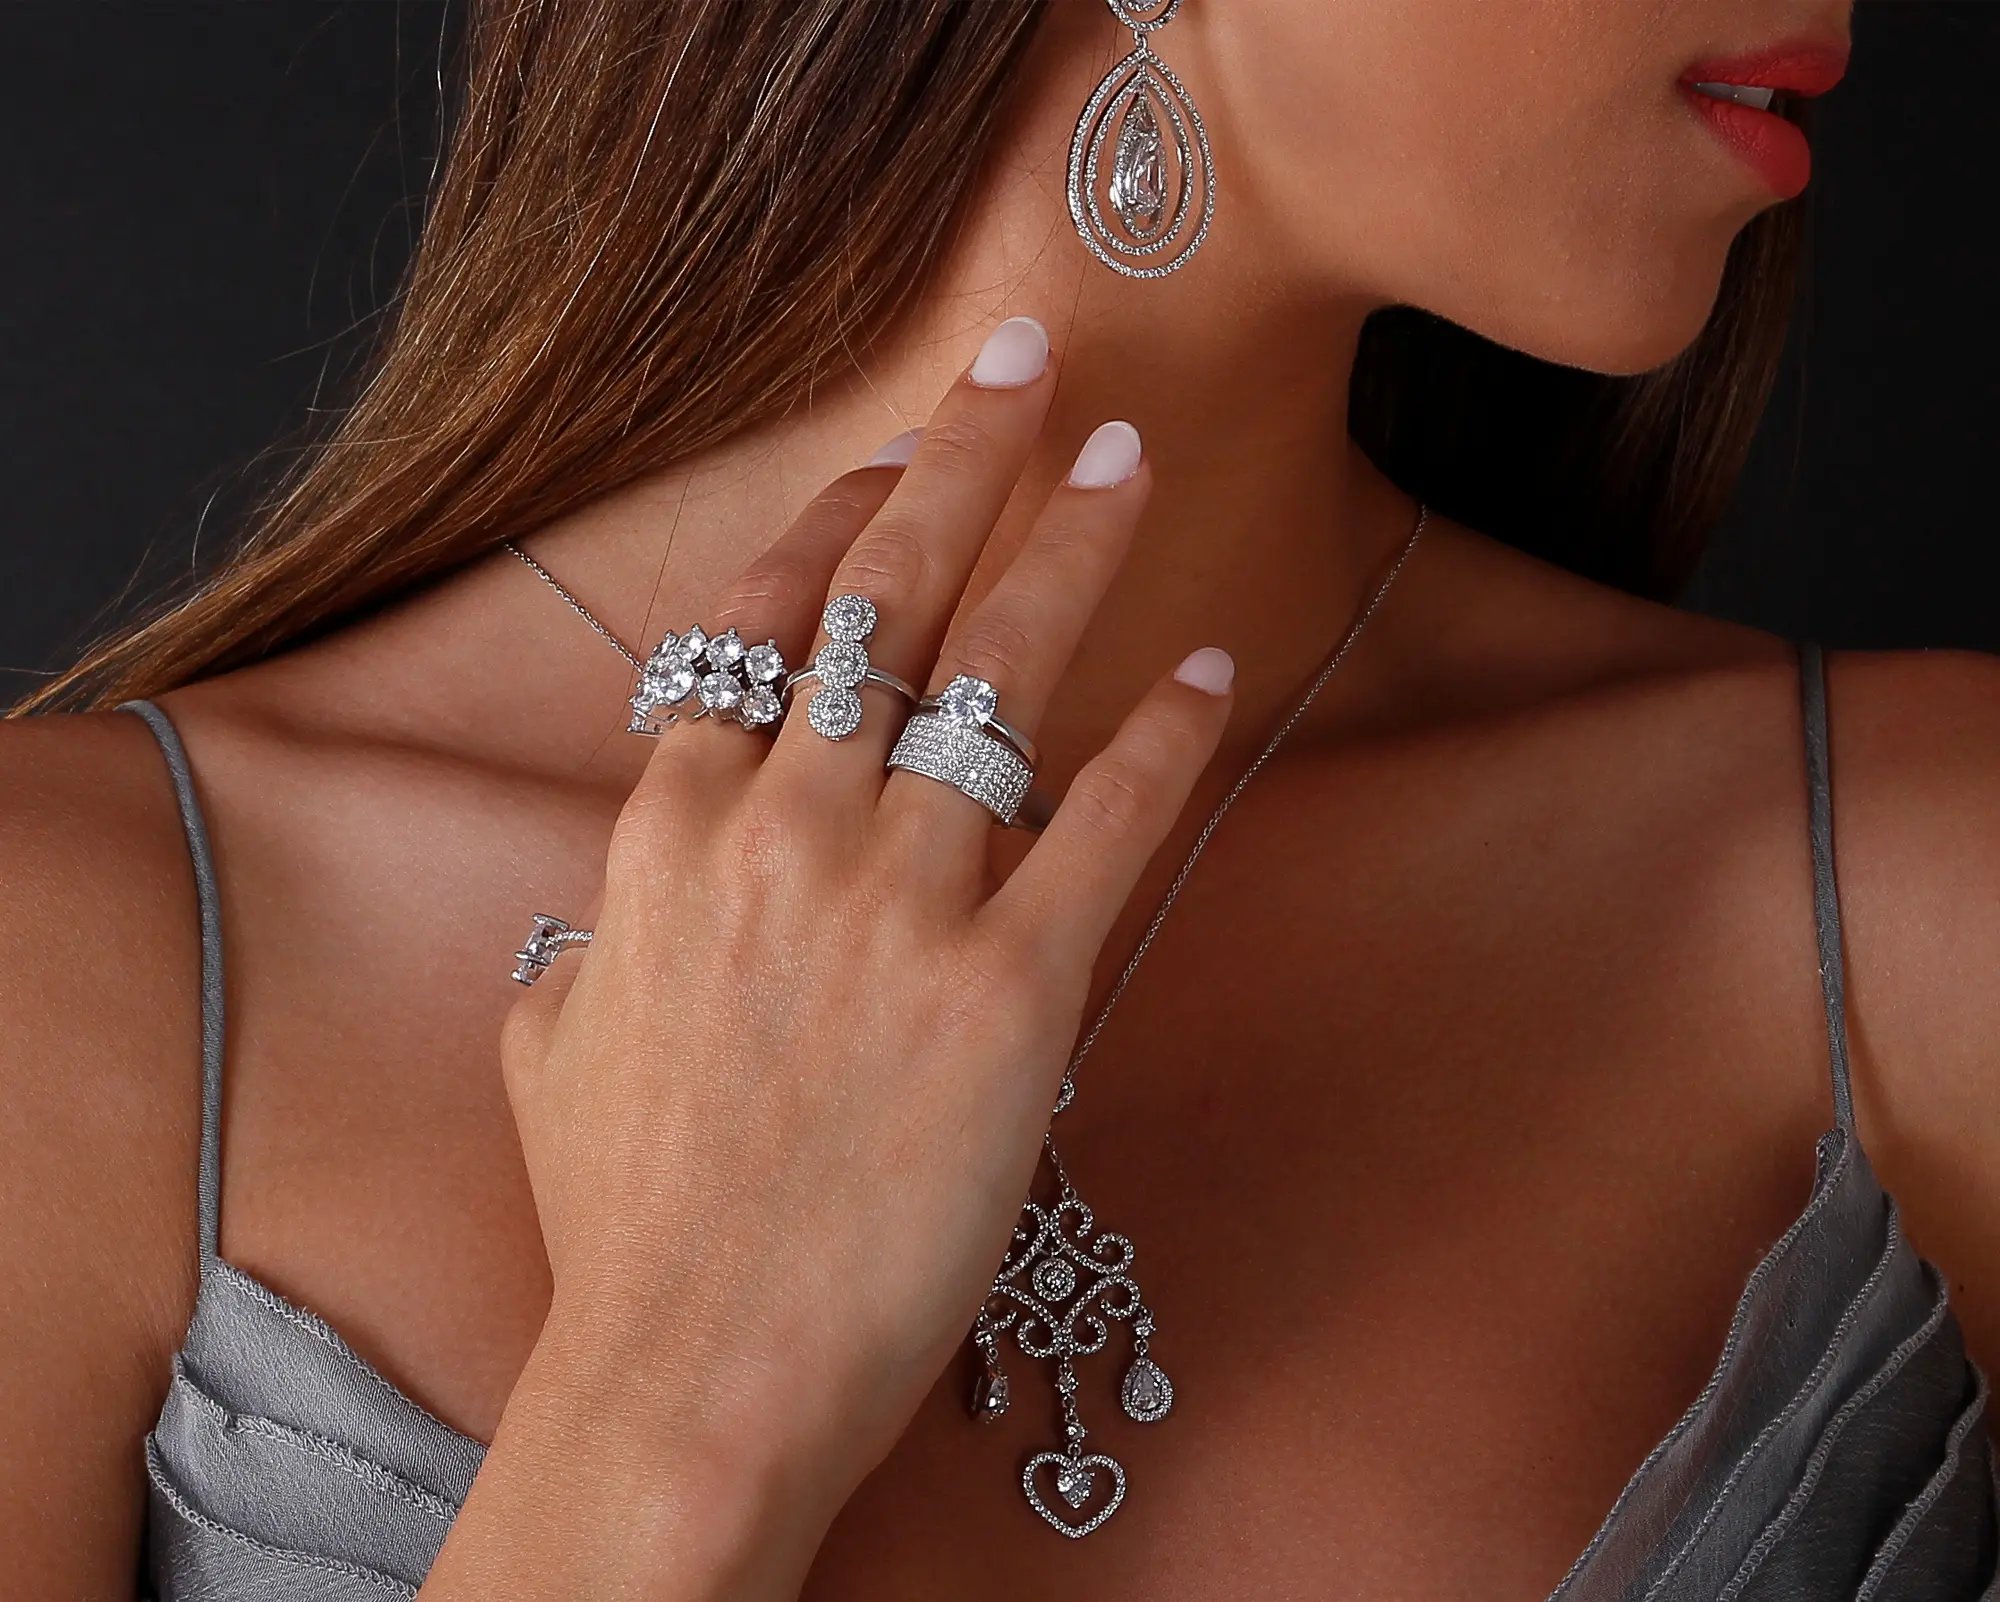 High-end Jewelry Retouching Service